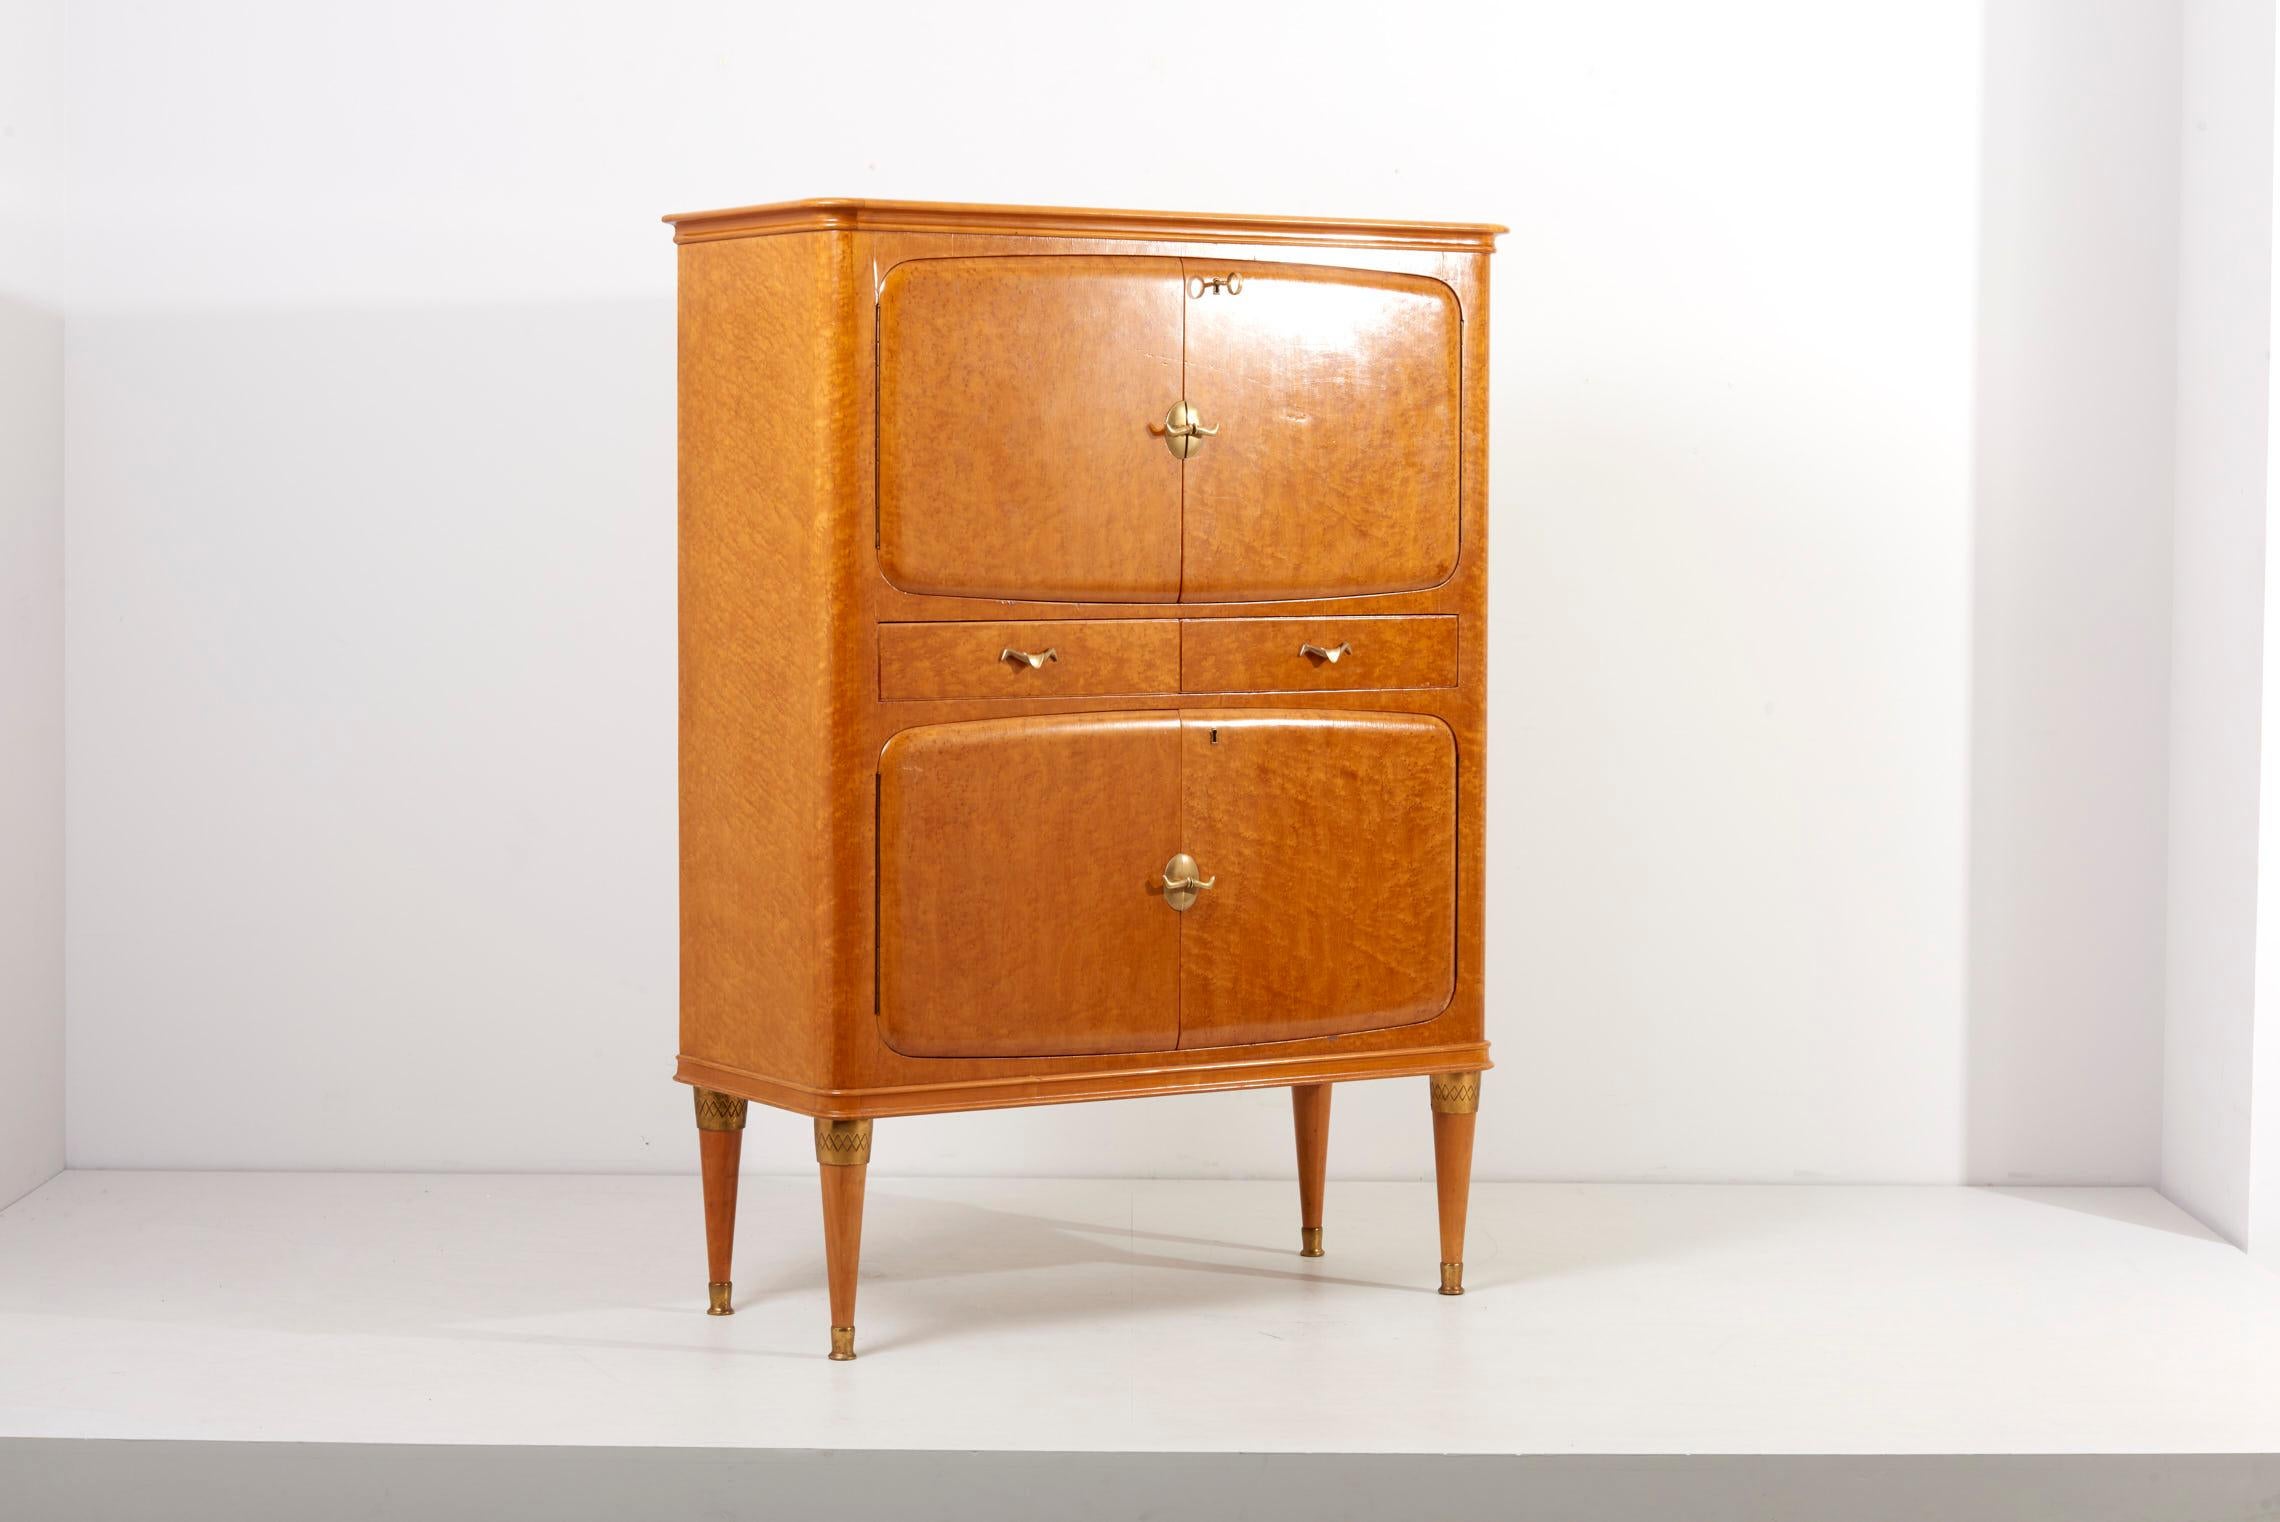 Italian Cabinet in Birdseye Maple, 1950s and mirrored interior and inside lighting.
The shapes and form language so as the hardware is very unique and well made. I would consider this cabinet being in a fantastic condition. The brass details on the